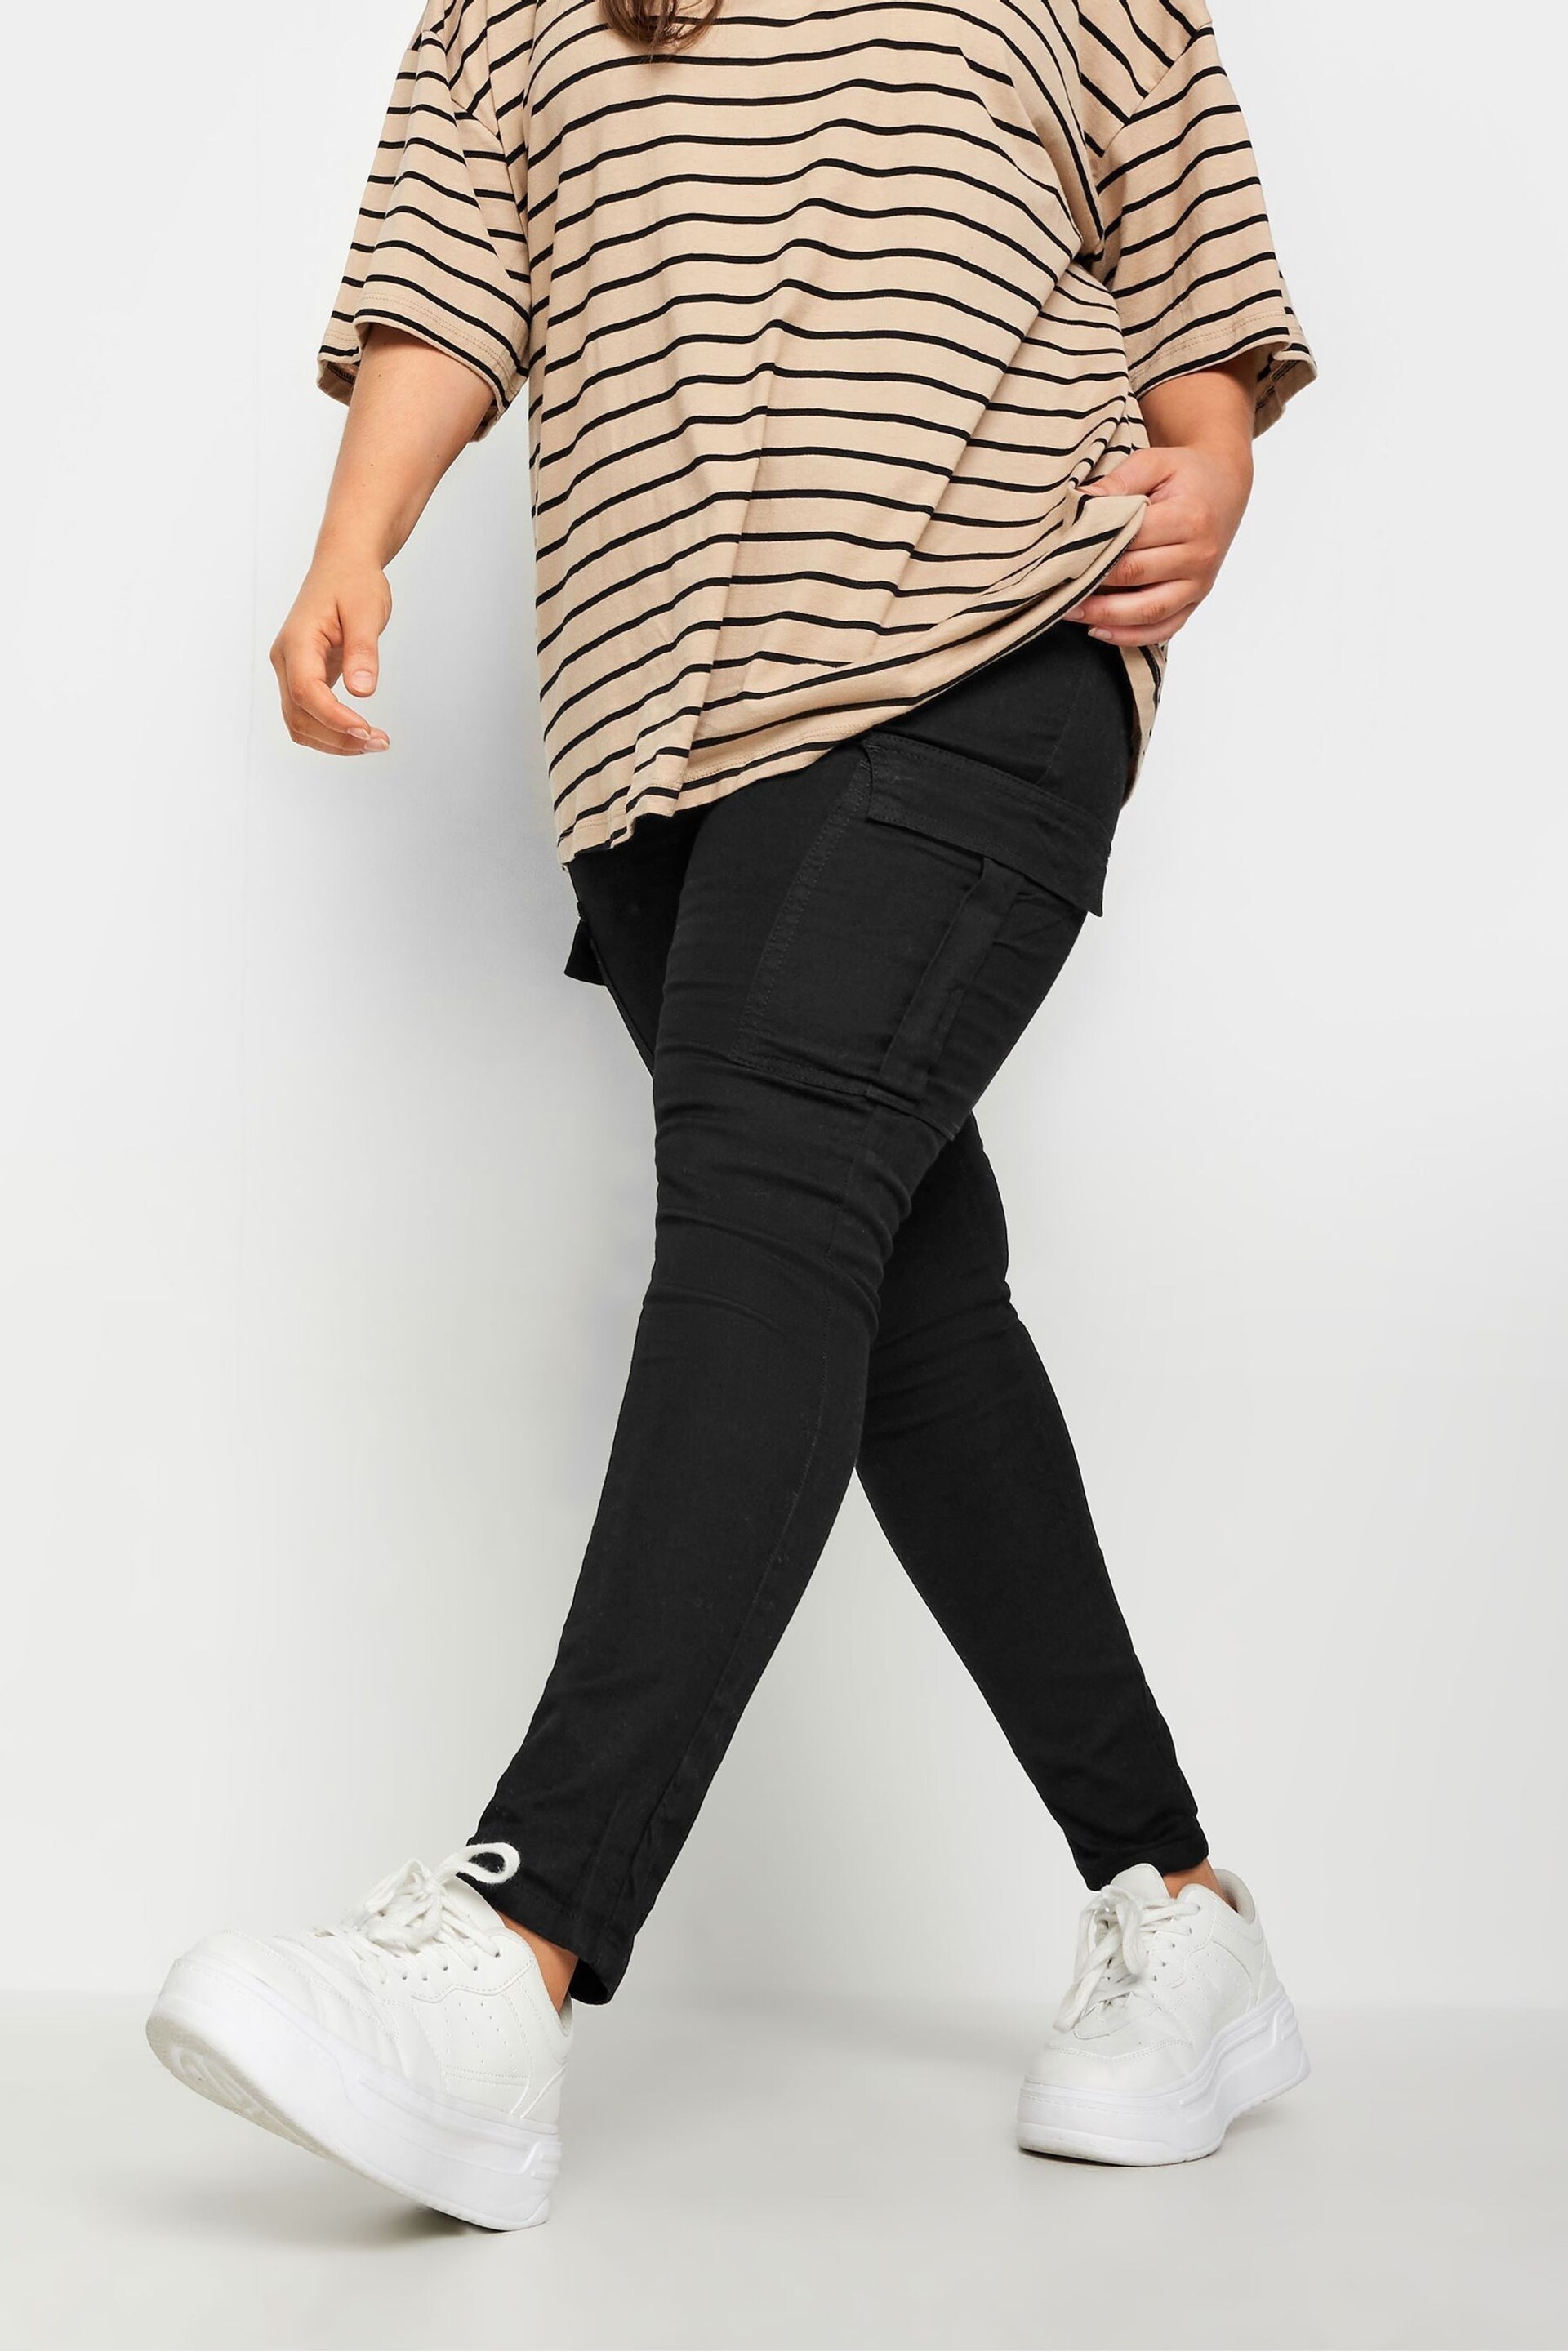 Yours Curve Black Cargo Grace Jeggings - Image 1 of 4